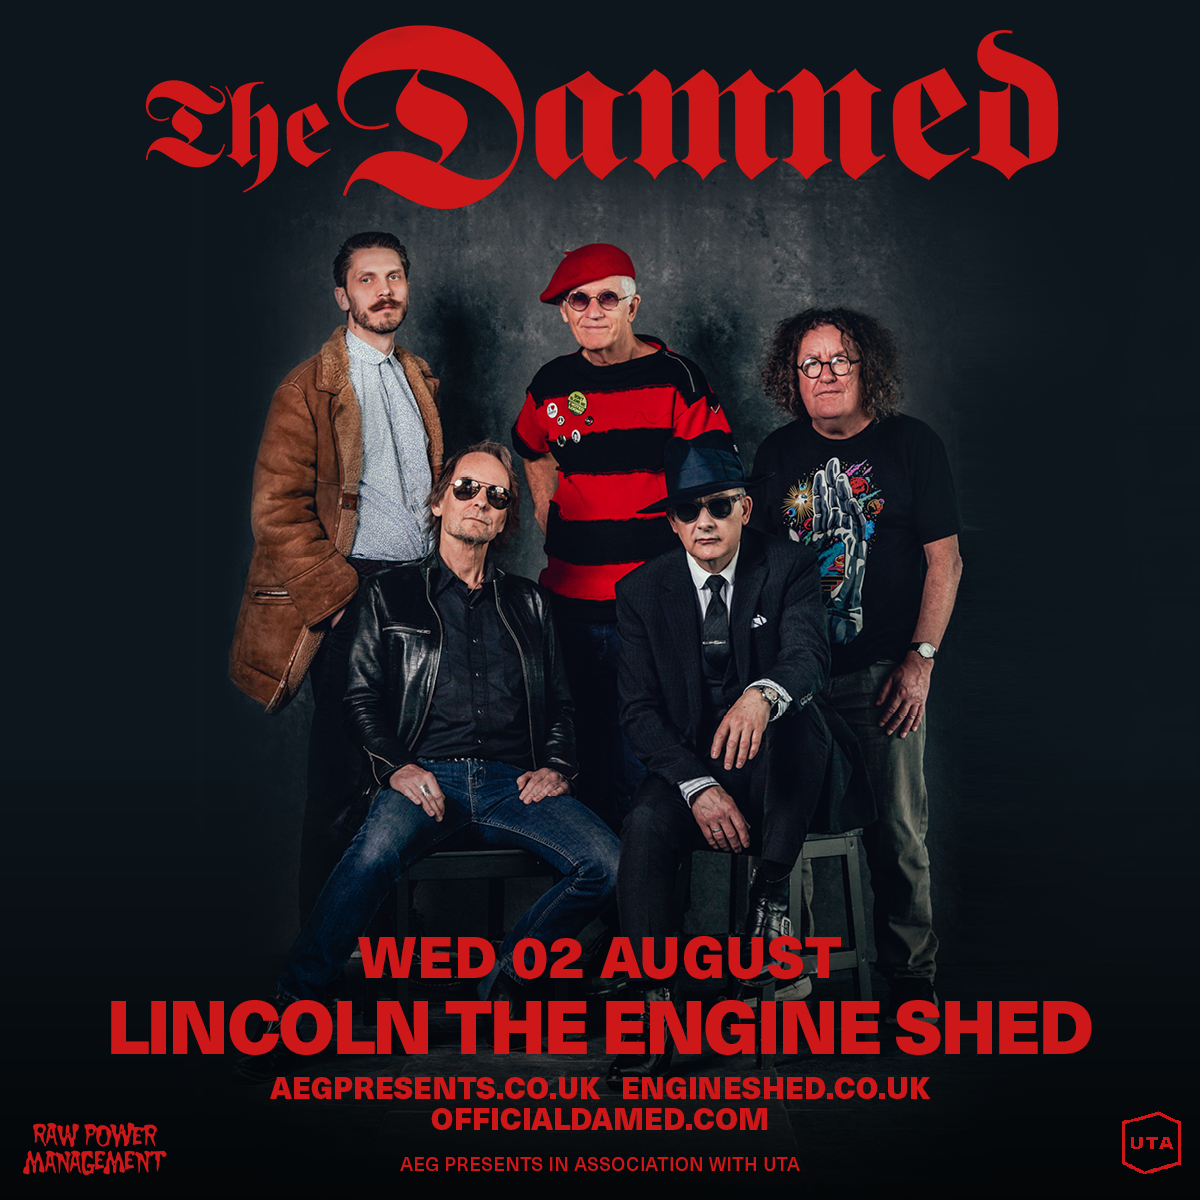 We’re heading to Lincoln for a show at The Engine Shed on 2nd August. Tickets on sale this Friday 10 AM BST!